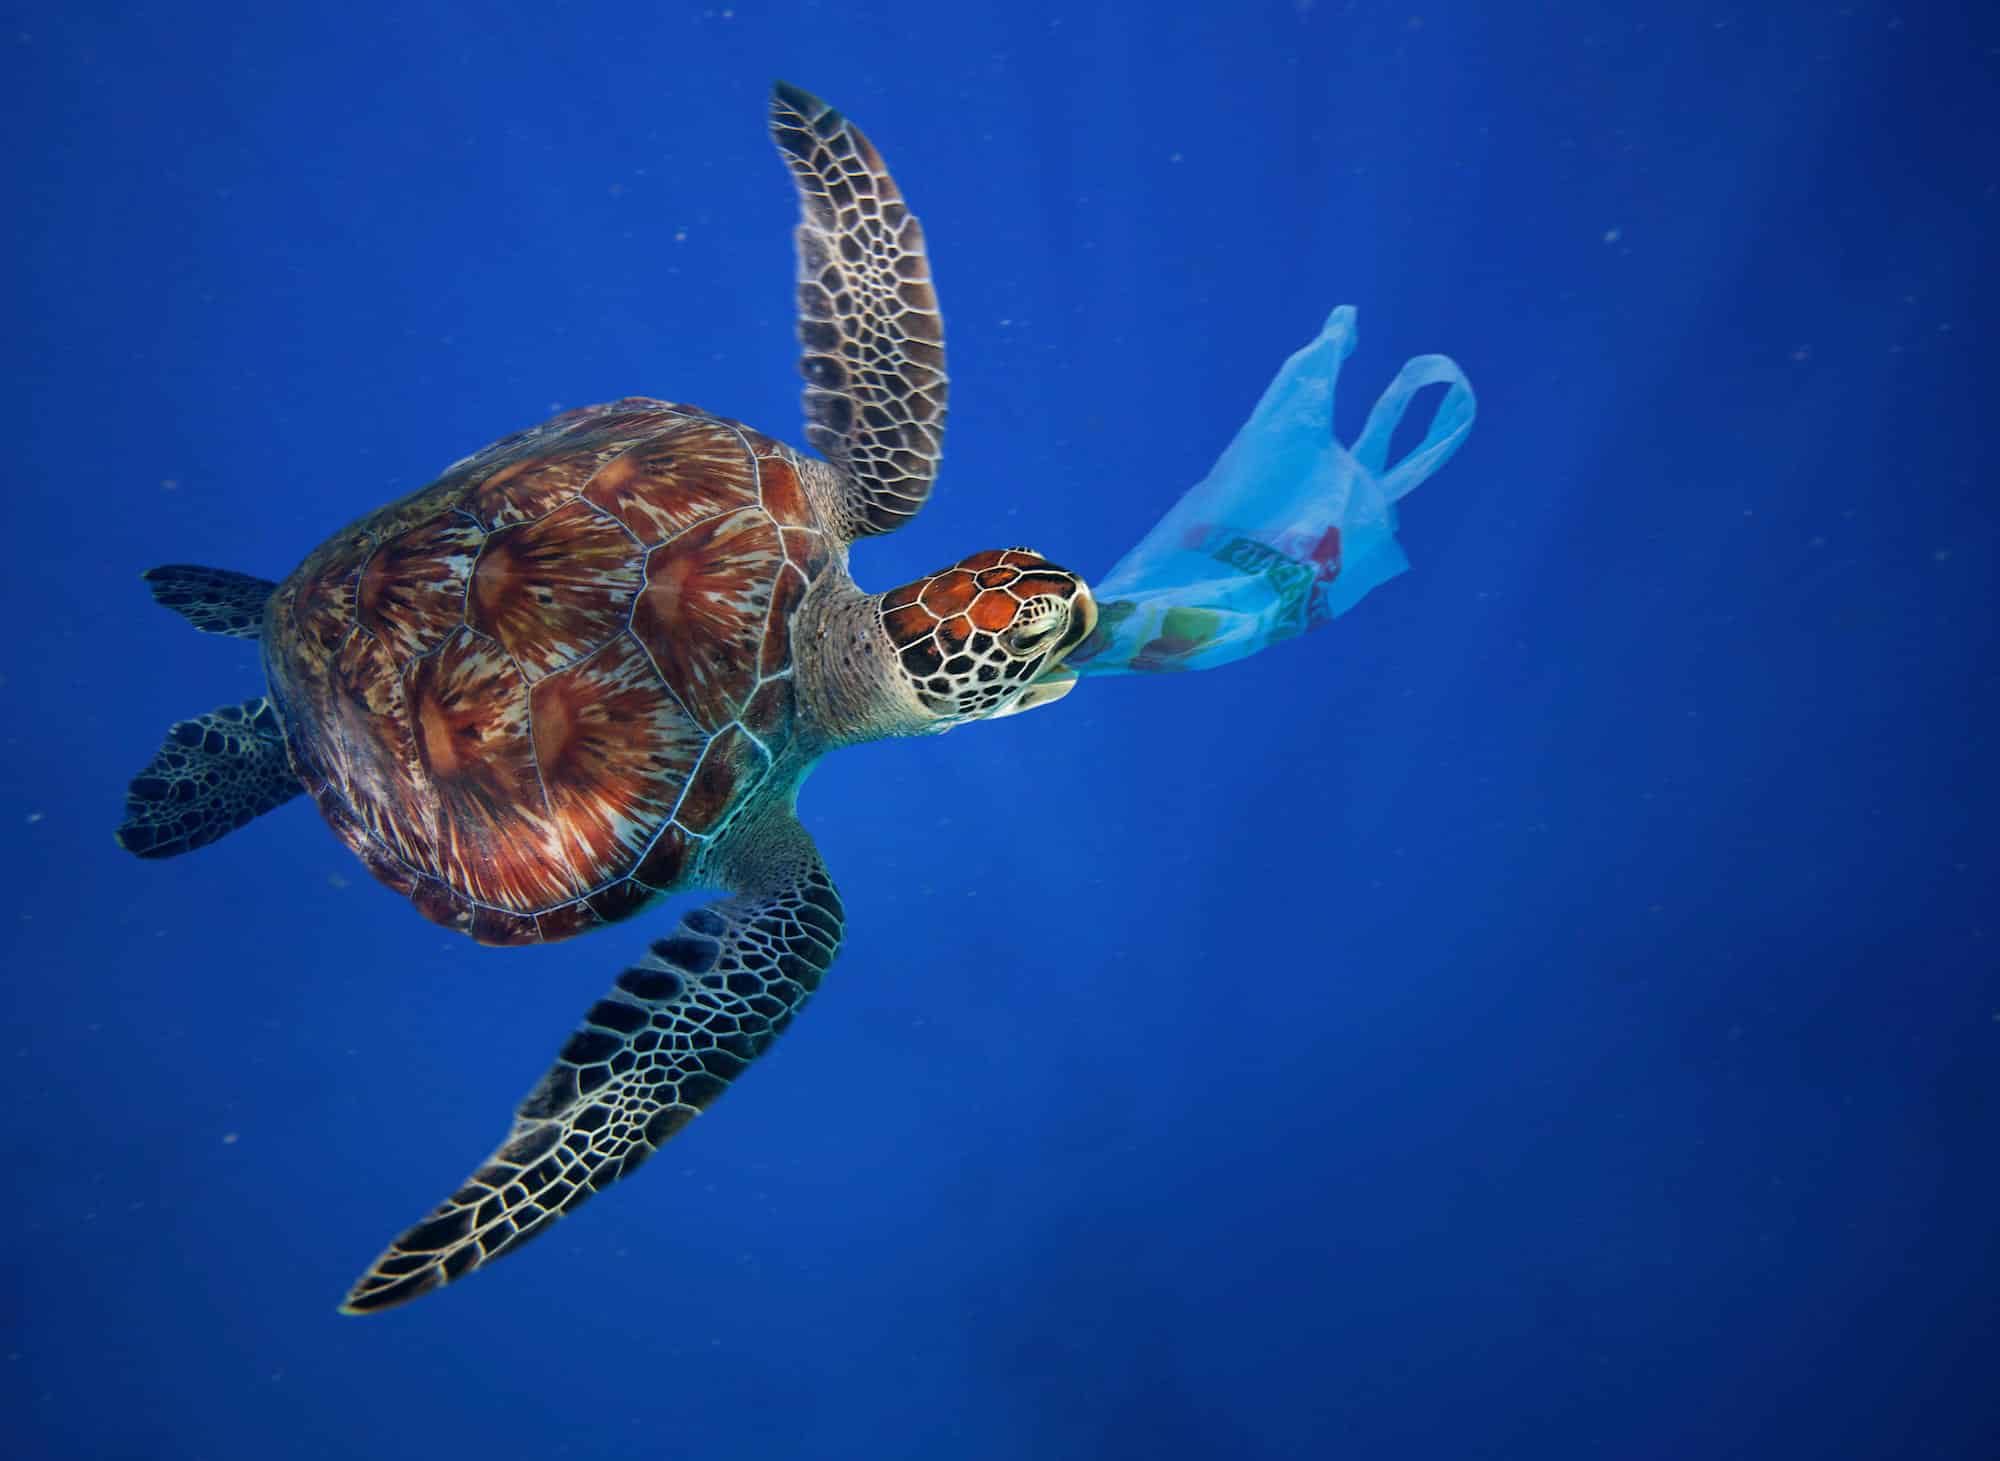 How Does Plastic Affect Sea Turtles